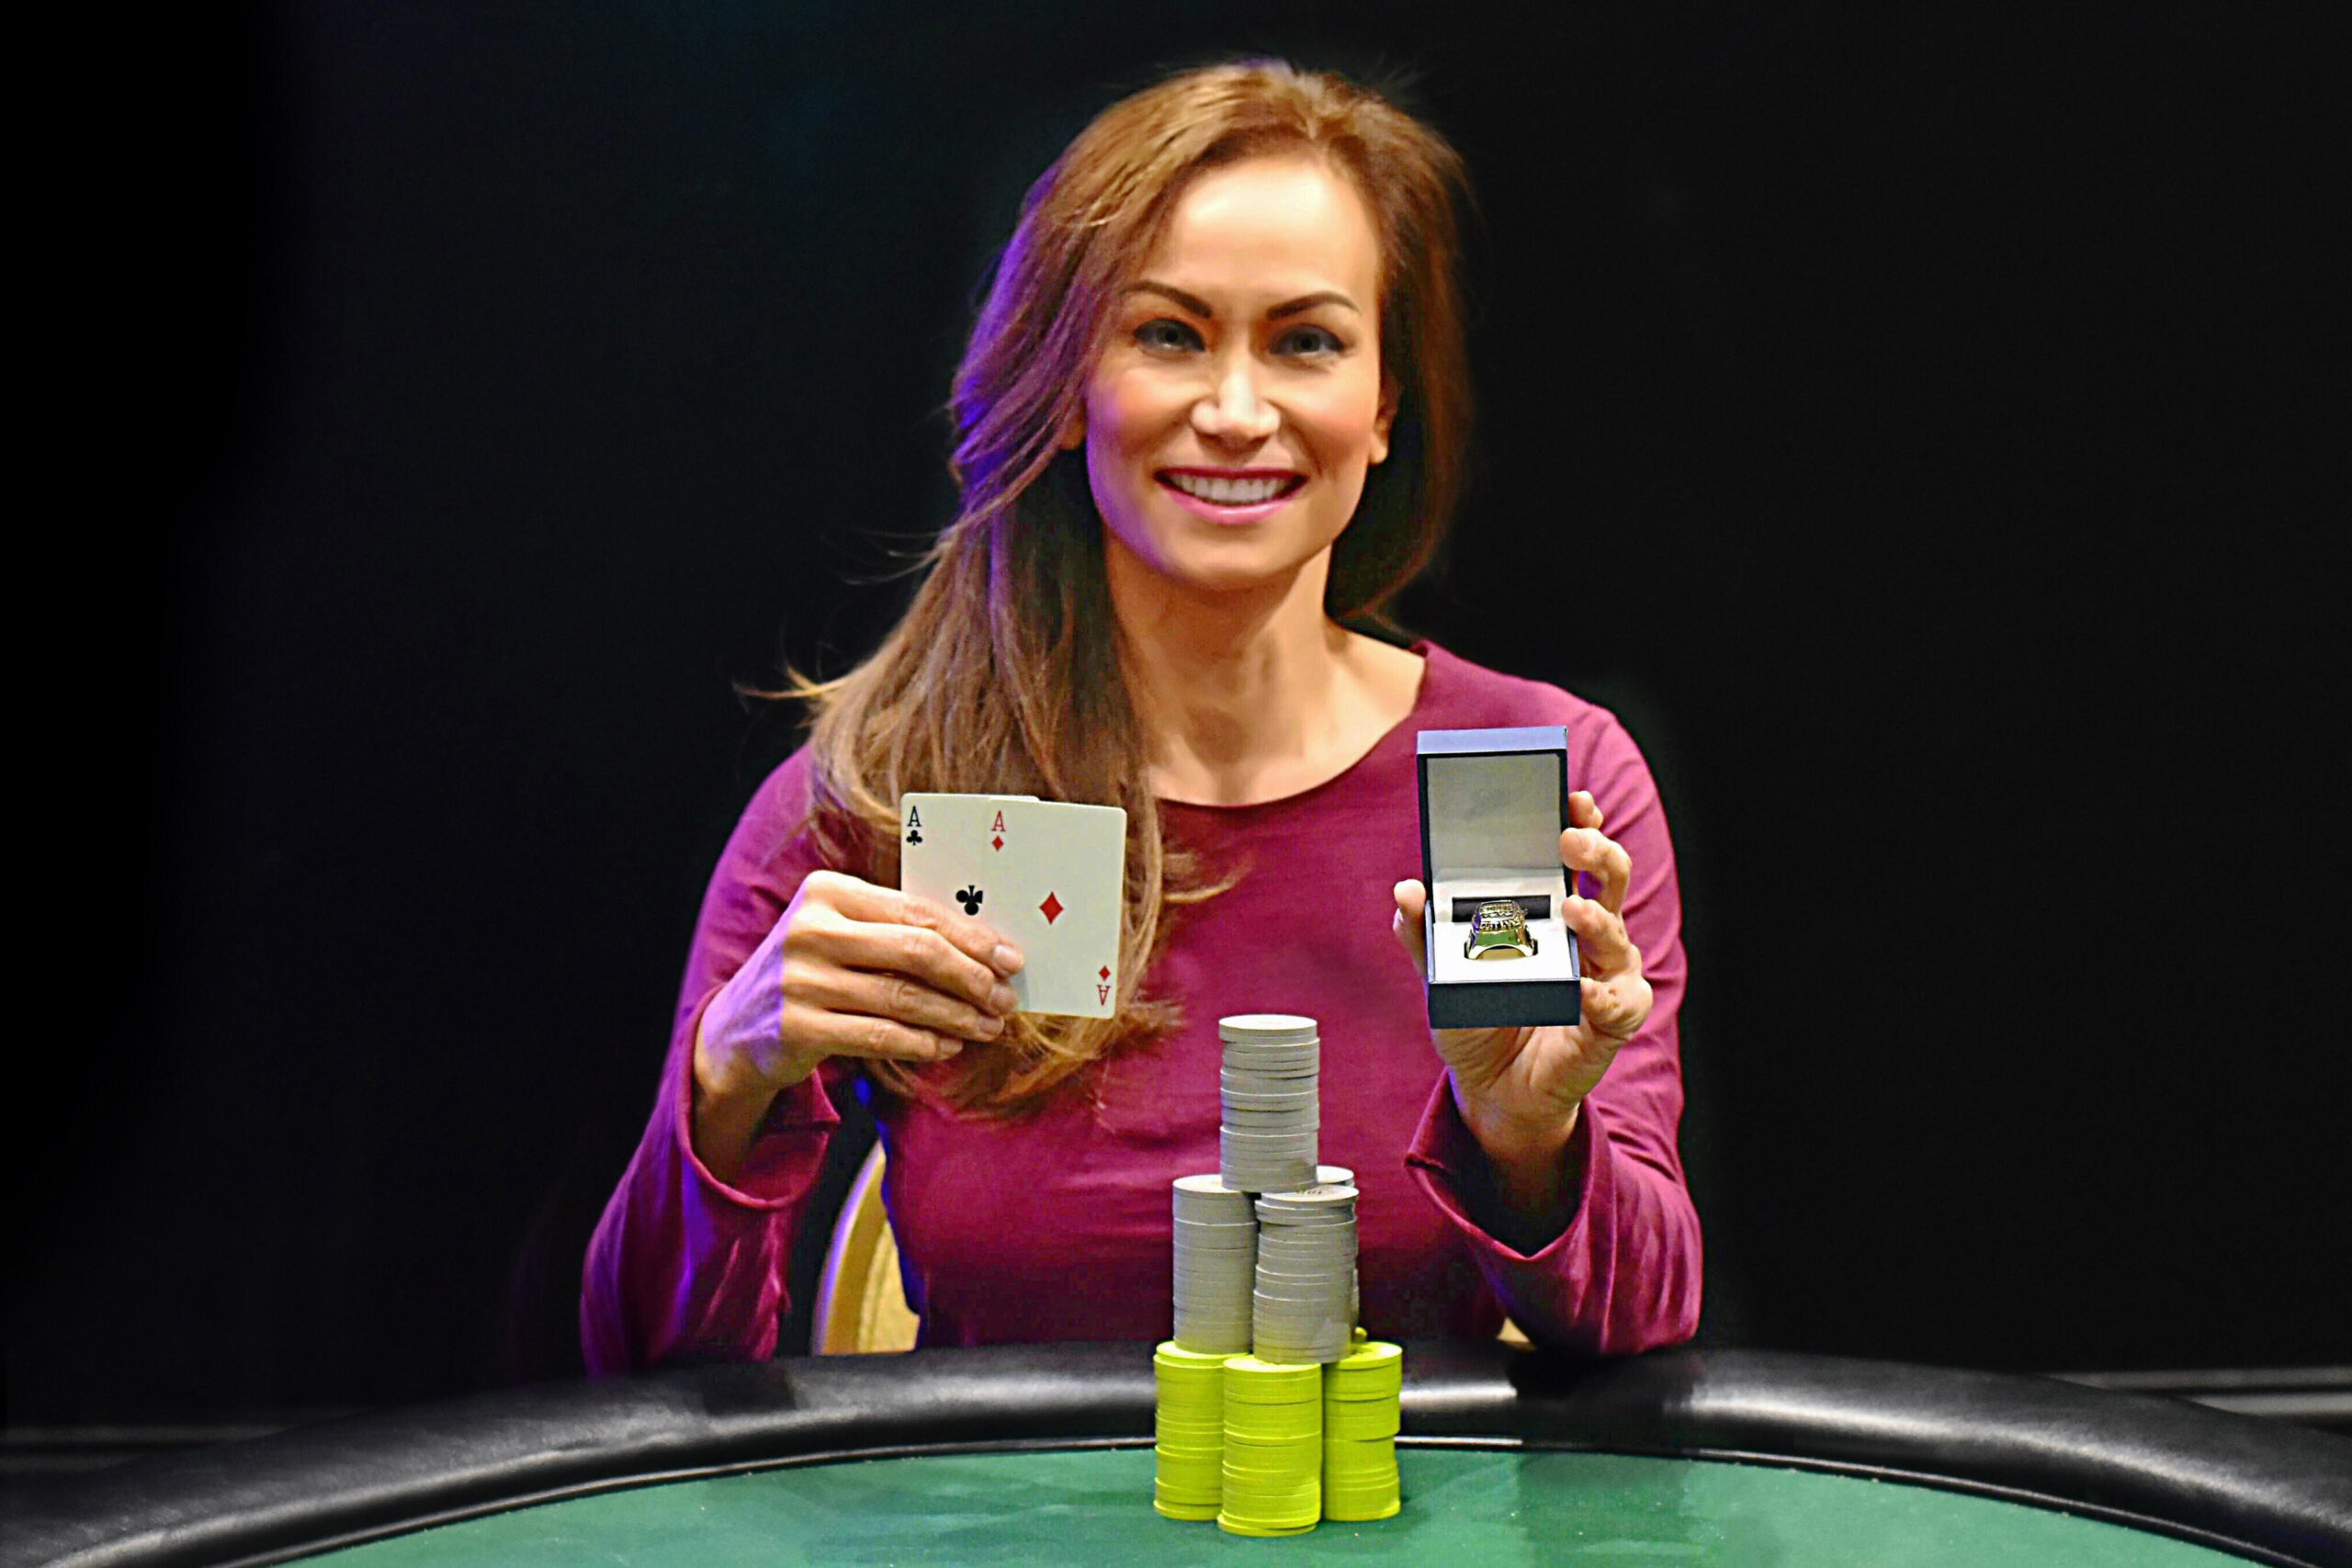 CardsChat Interview: Lena Evans on Philanthropy, Winning Two WSOPC Rings, and Rubbing Elbows with Royalty